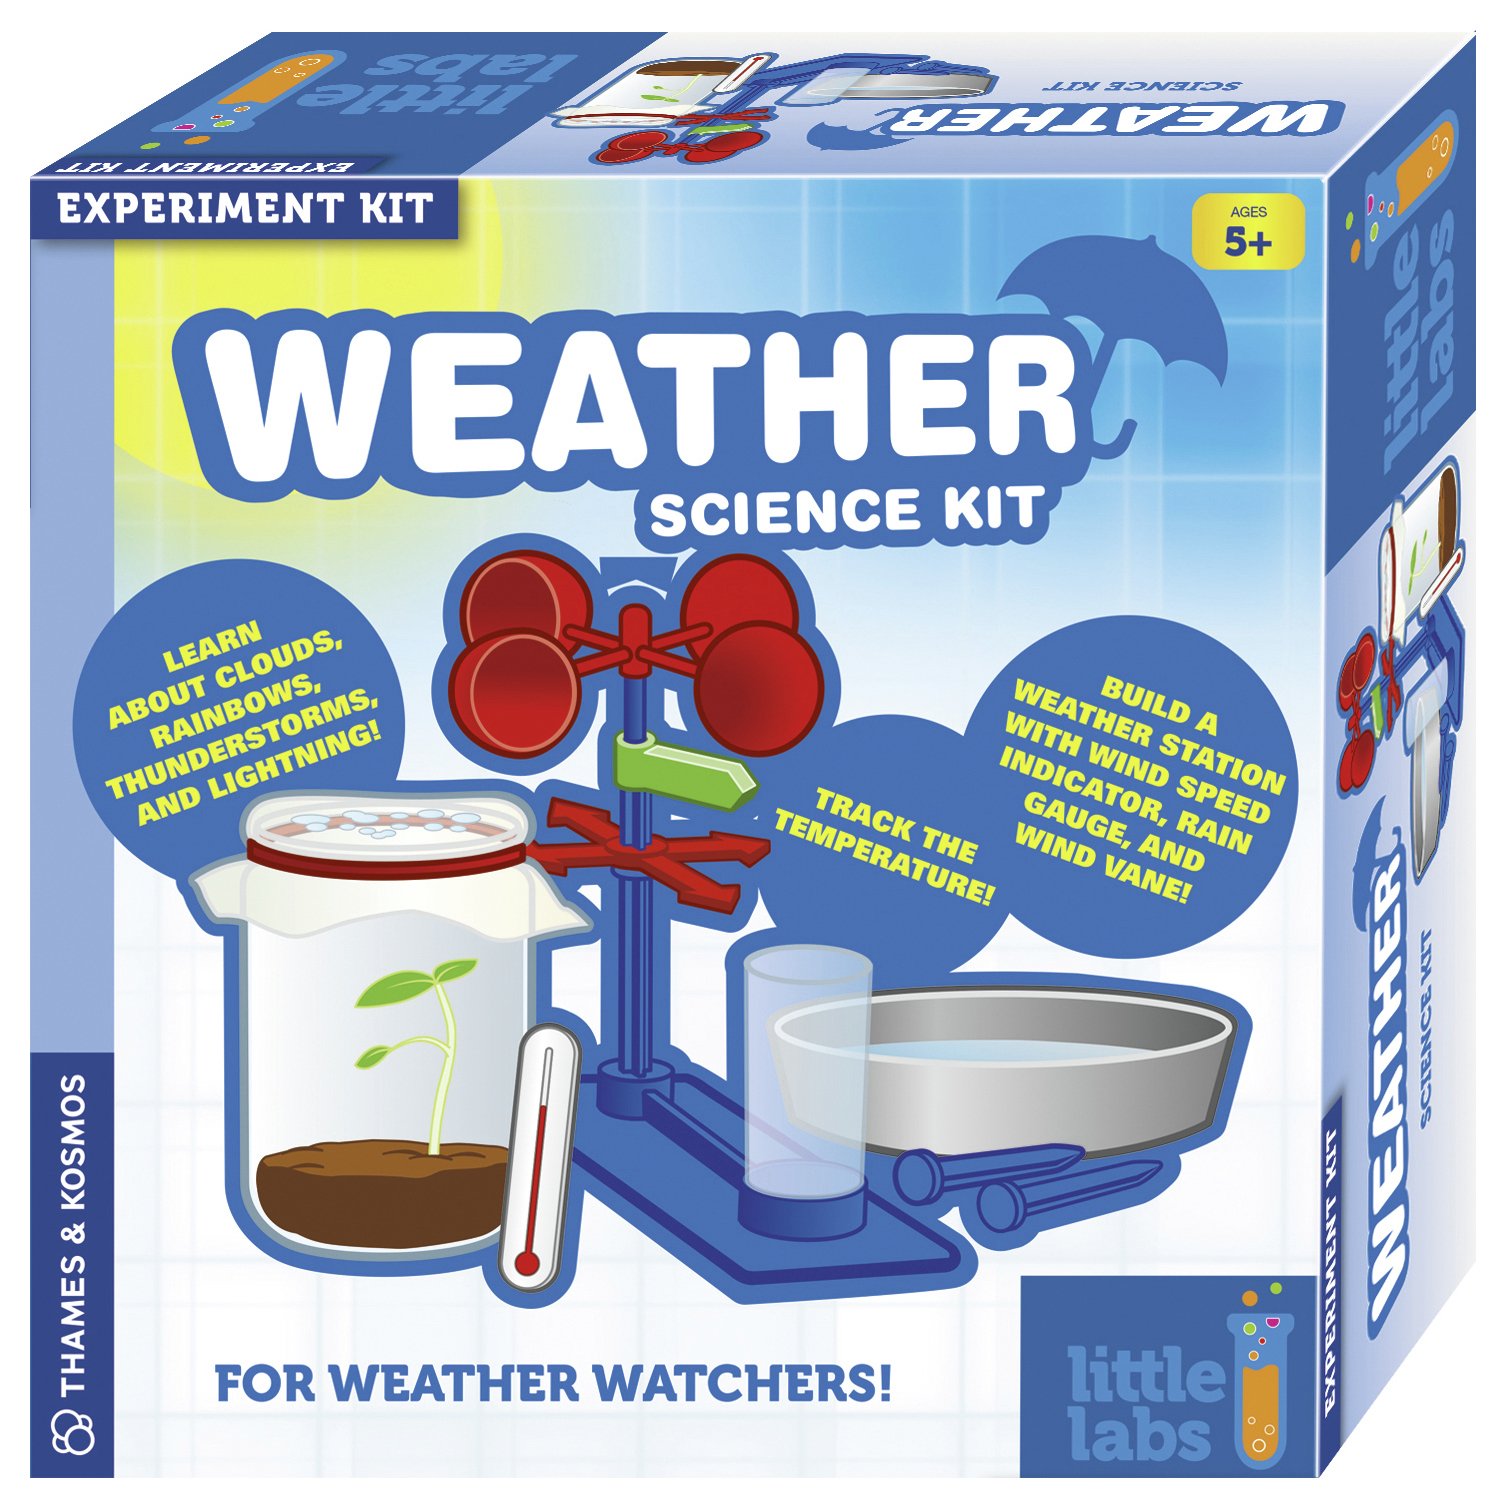 Little Labs Weather Science Experiment Kit.